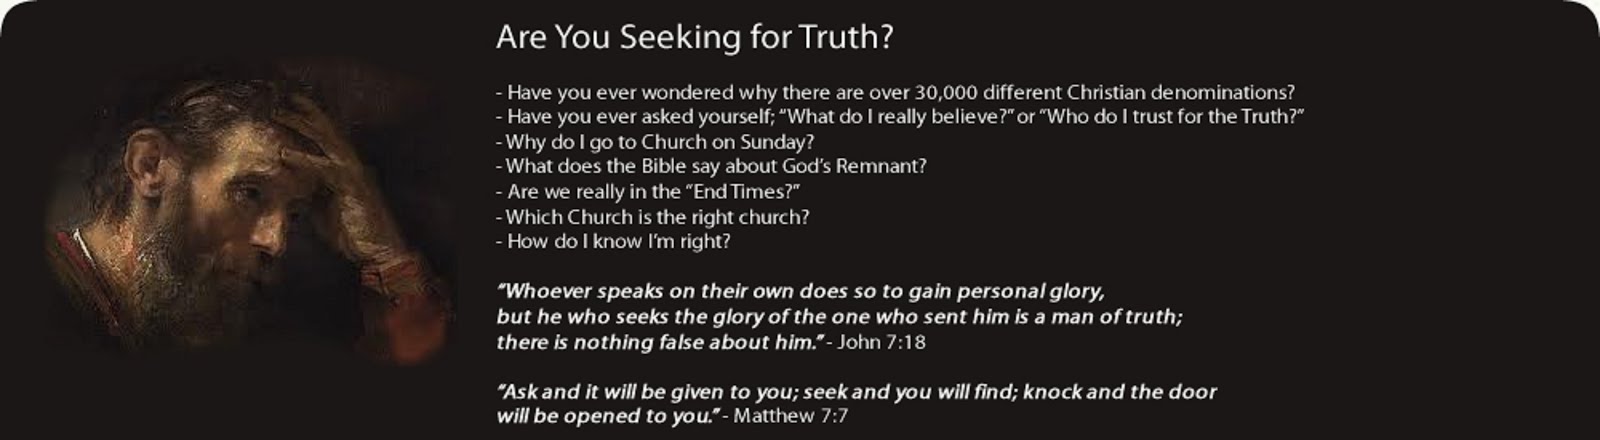 THE APOSTLE PAUL- WHO CAN I TRUST FOR THE TRUTH???